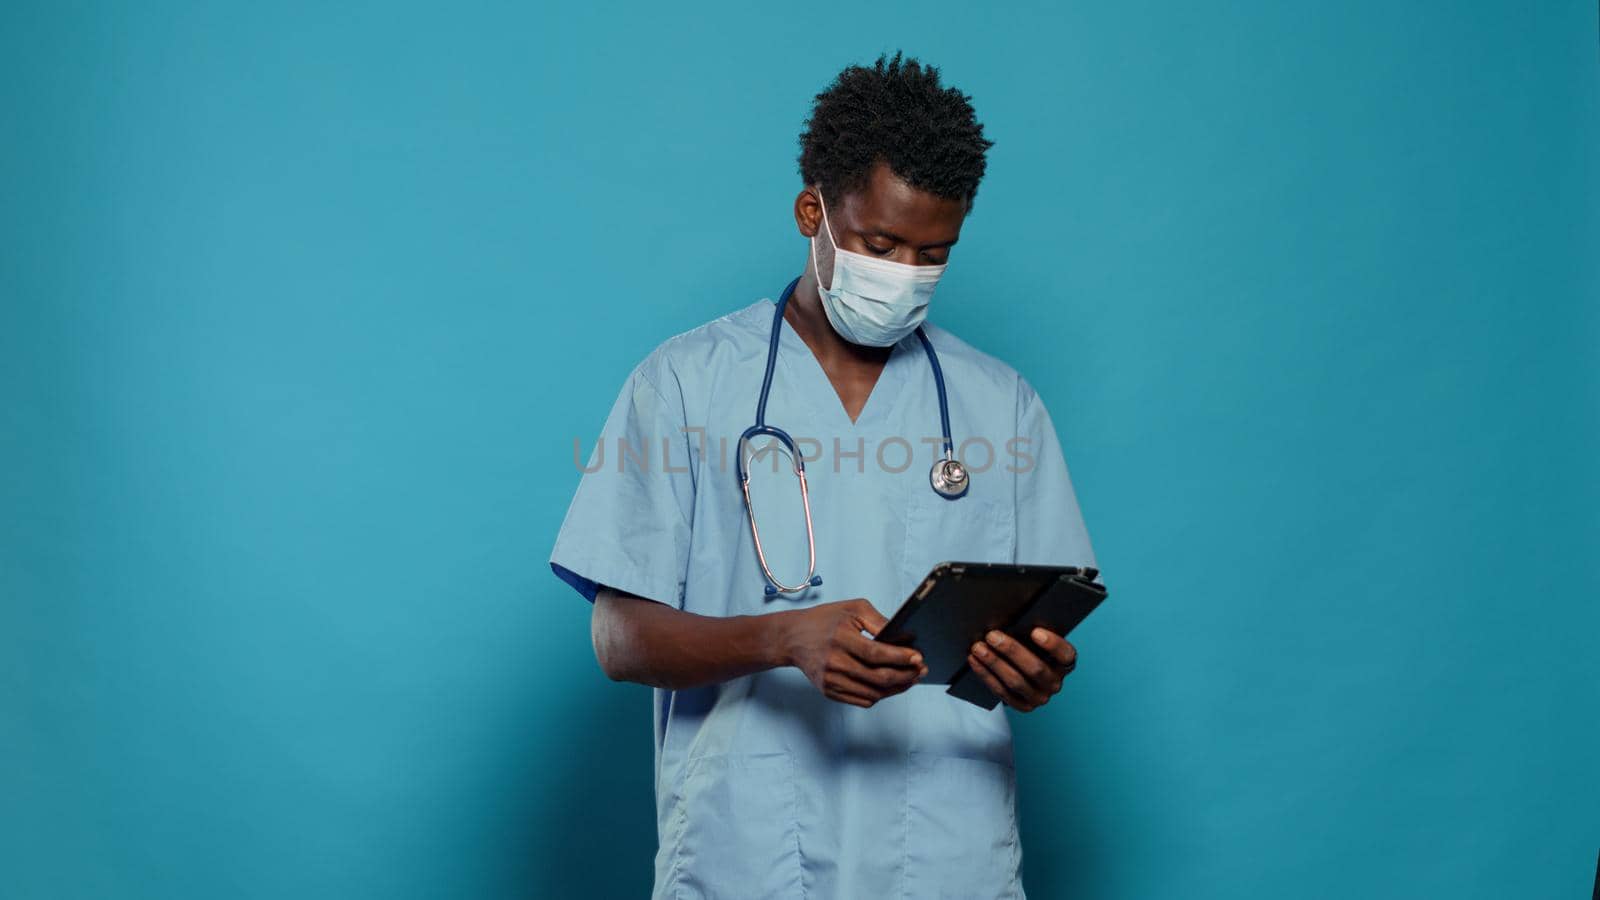 Medical assistant using digital tablet while wearing face mask and stethoscope in studio. Nurse with protection against coronavirus pandemic and blue uniform, looking at device screen